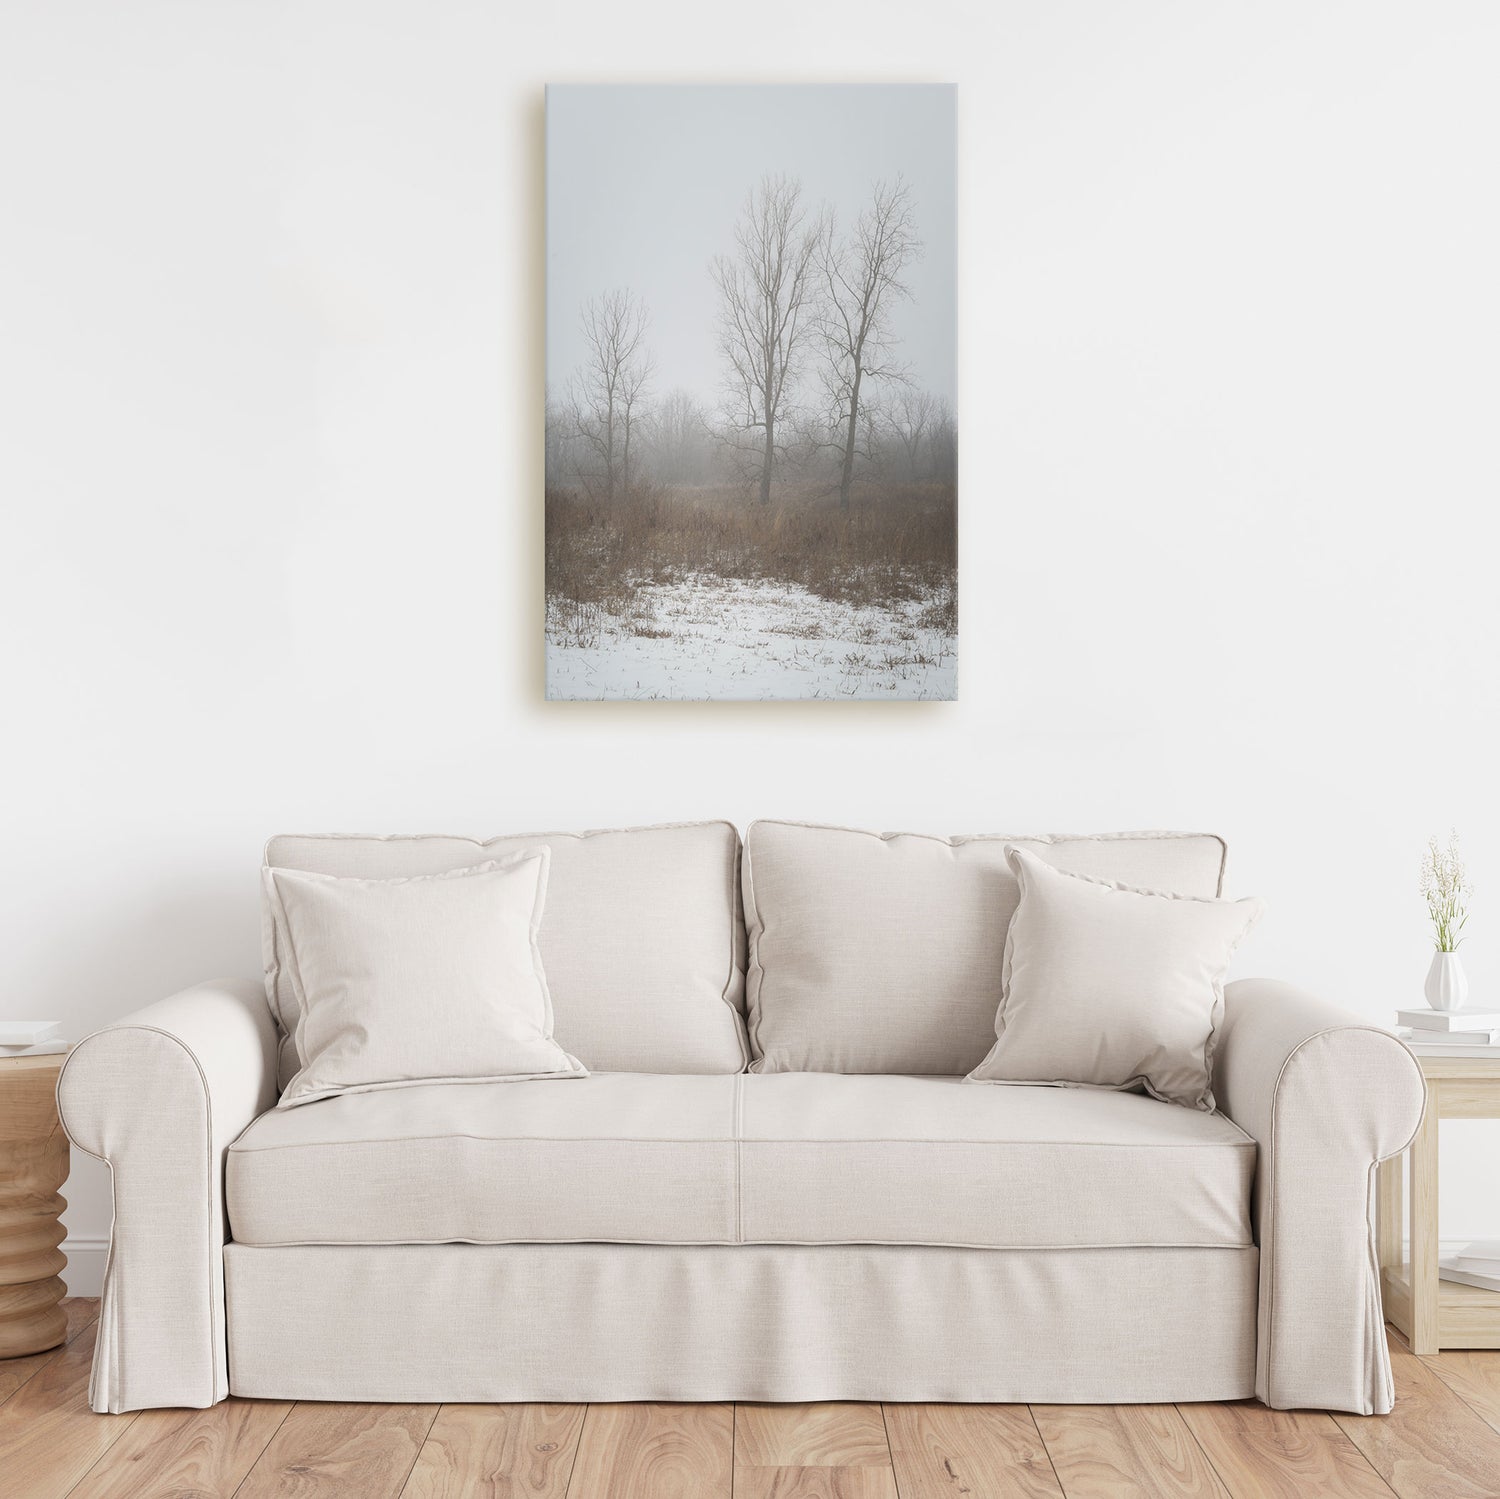 Elegant canvas wall art depicting a tranquil winter landscape with fog-covered trees.